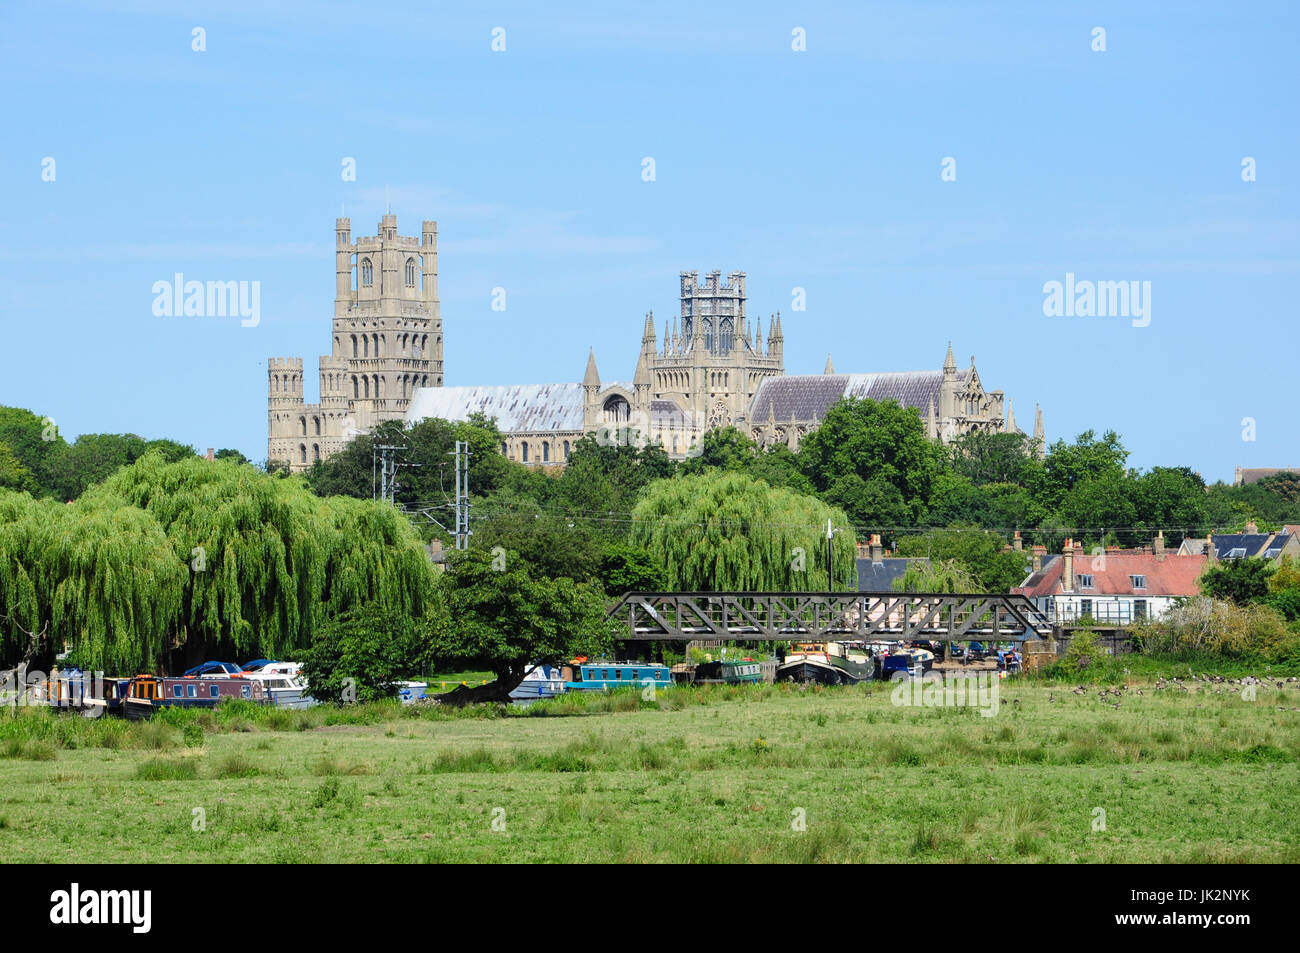 The Cathedral viewed from south of the river, Ely, Cambridgeshire, England, UK Stock Photo